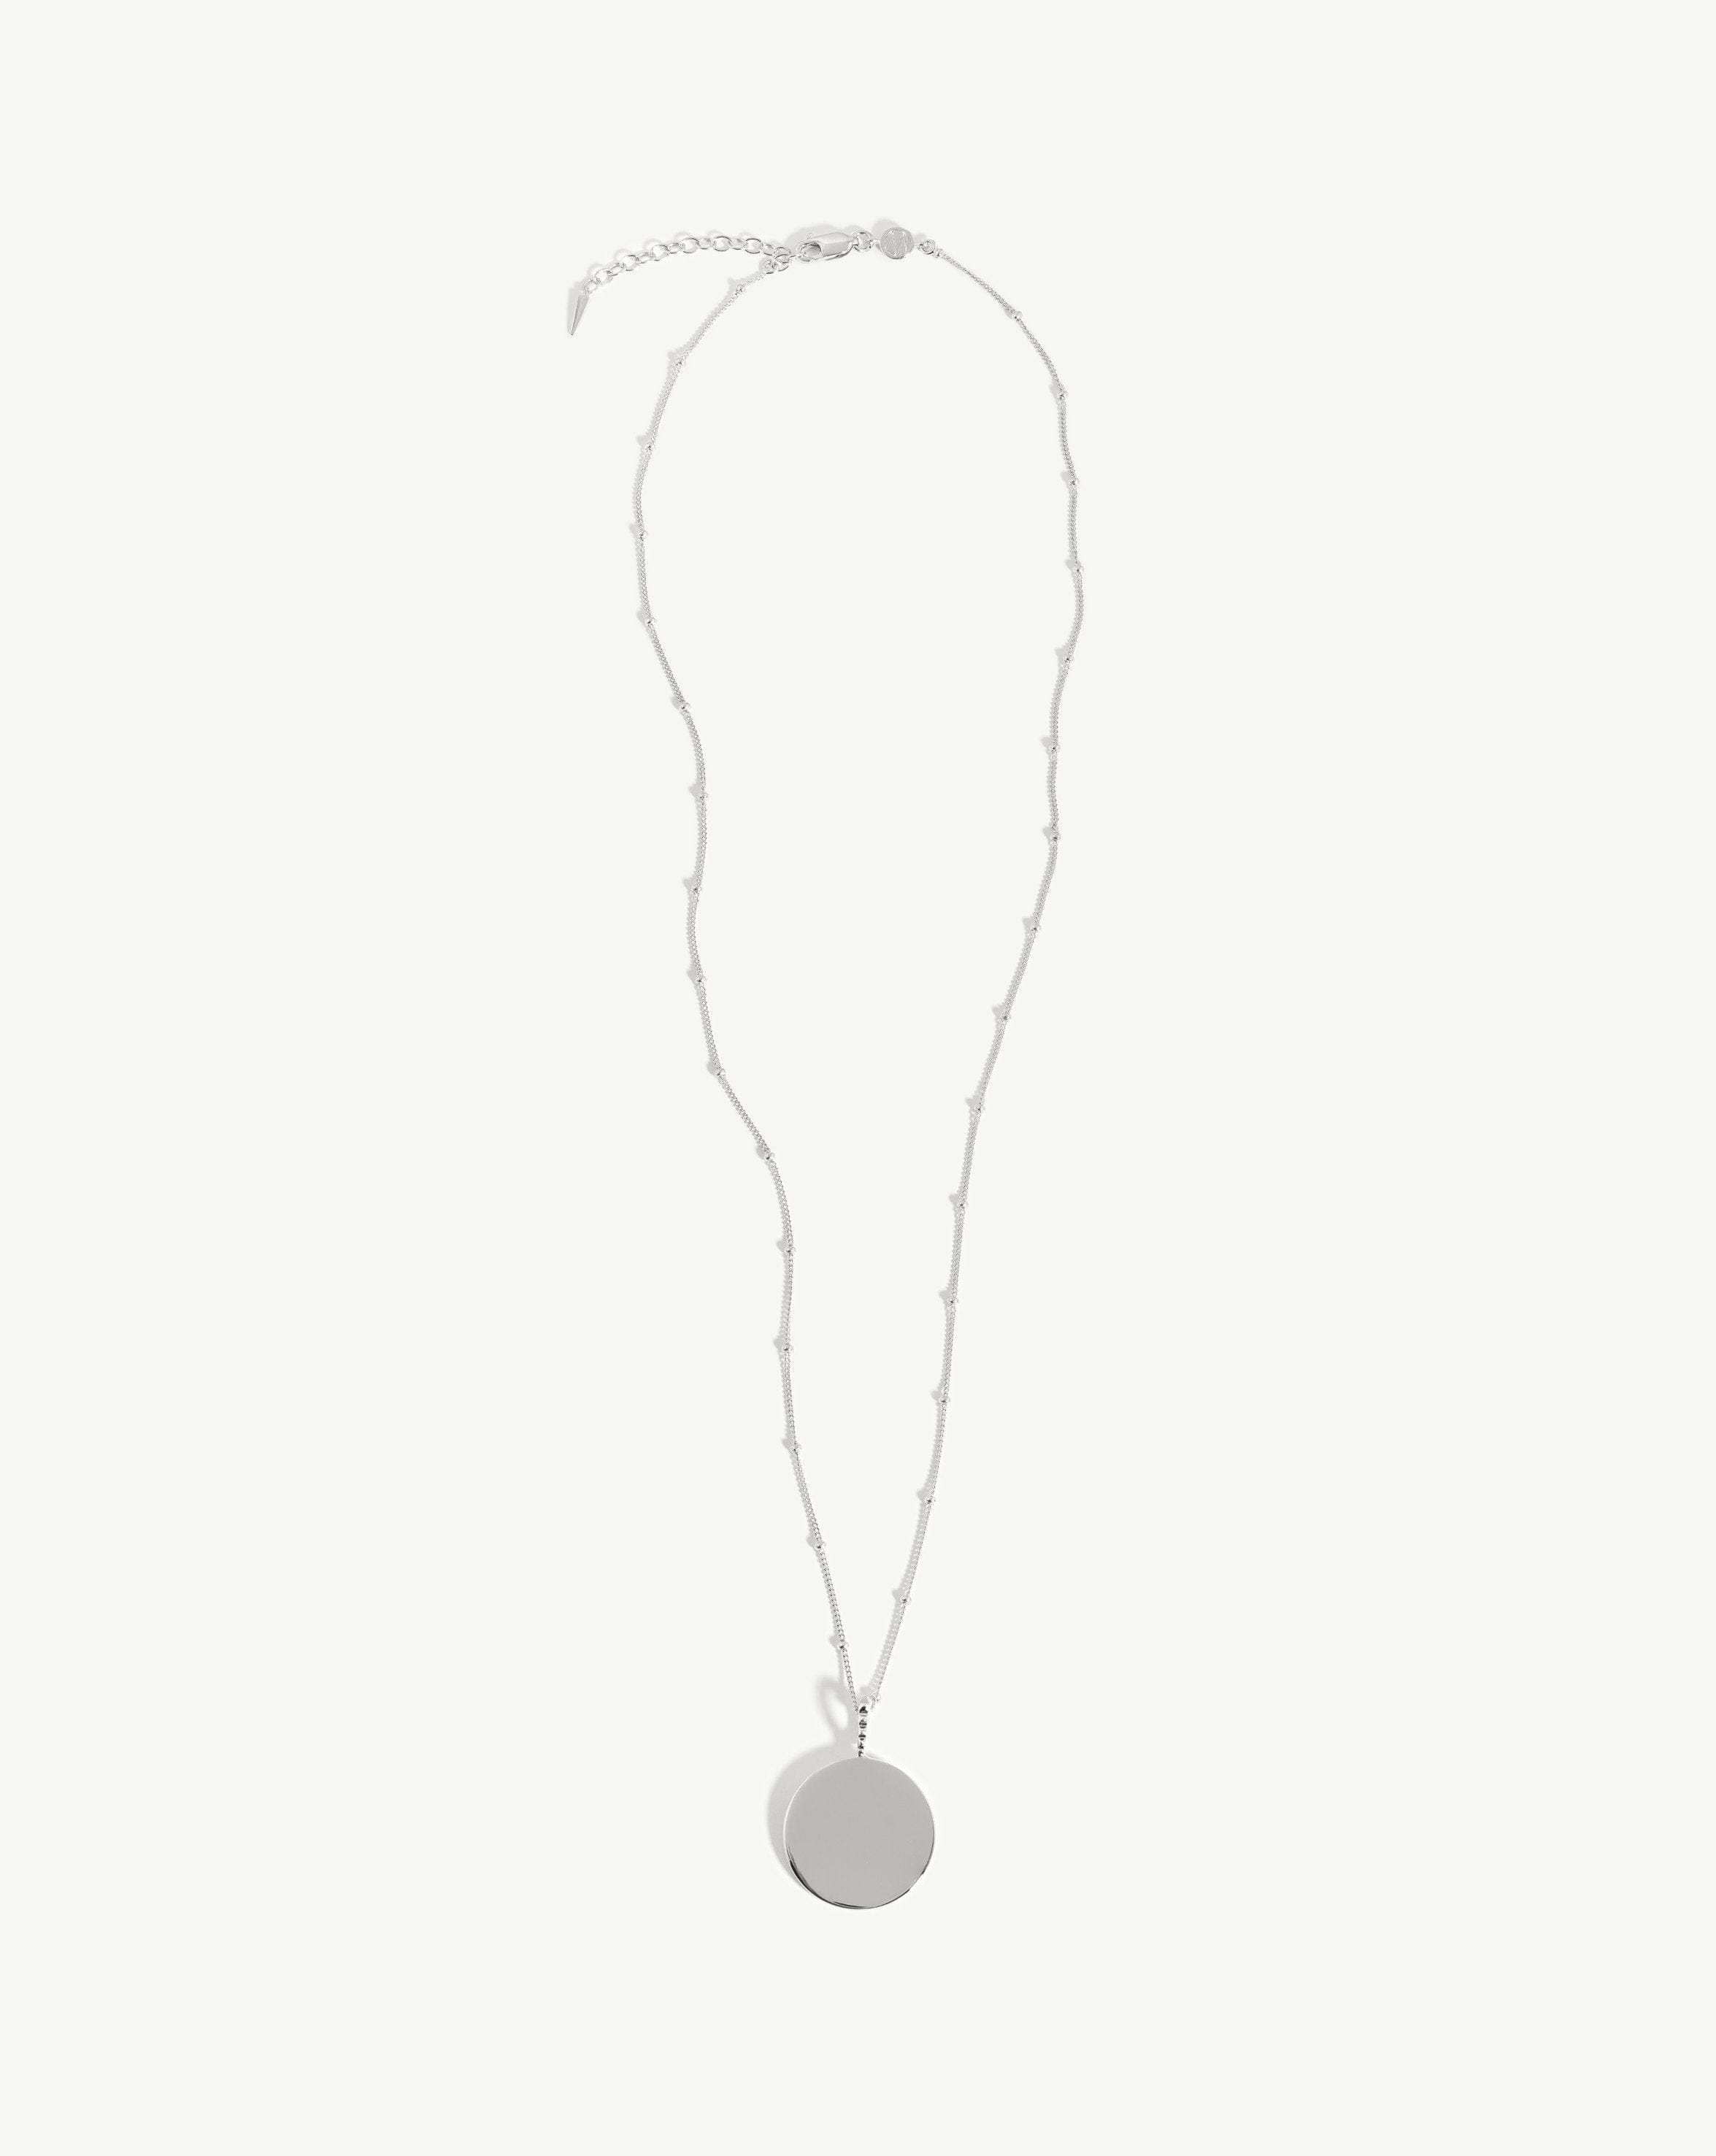 Mom Necklace - Personalized Engraved Disc Necklace | Sincerely Silver